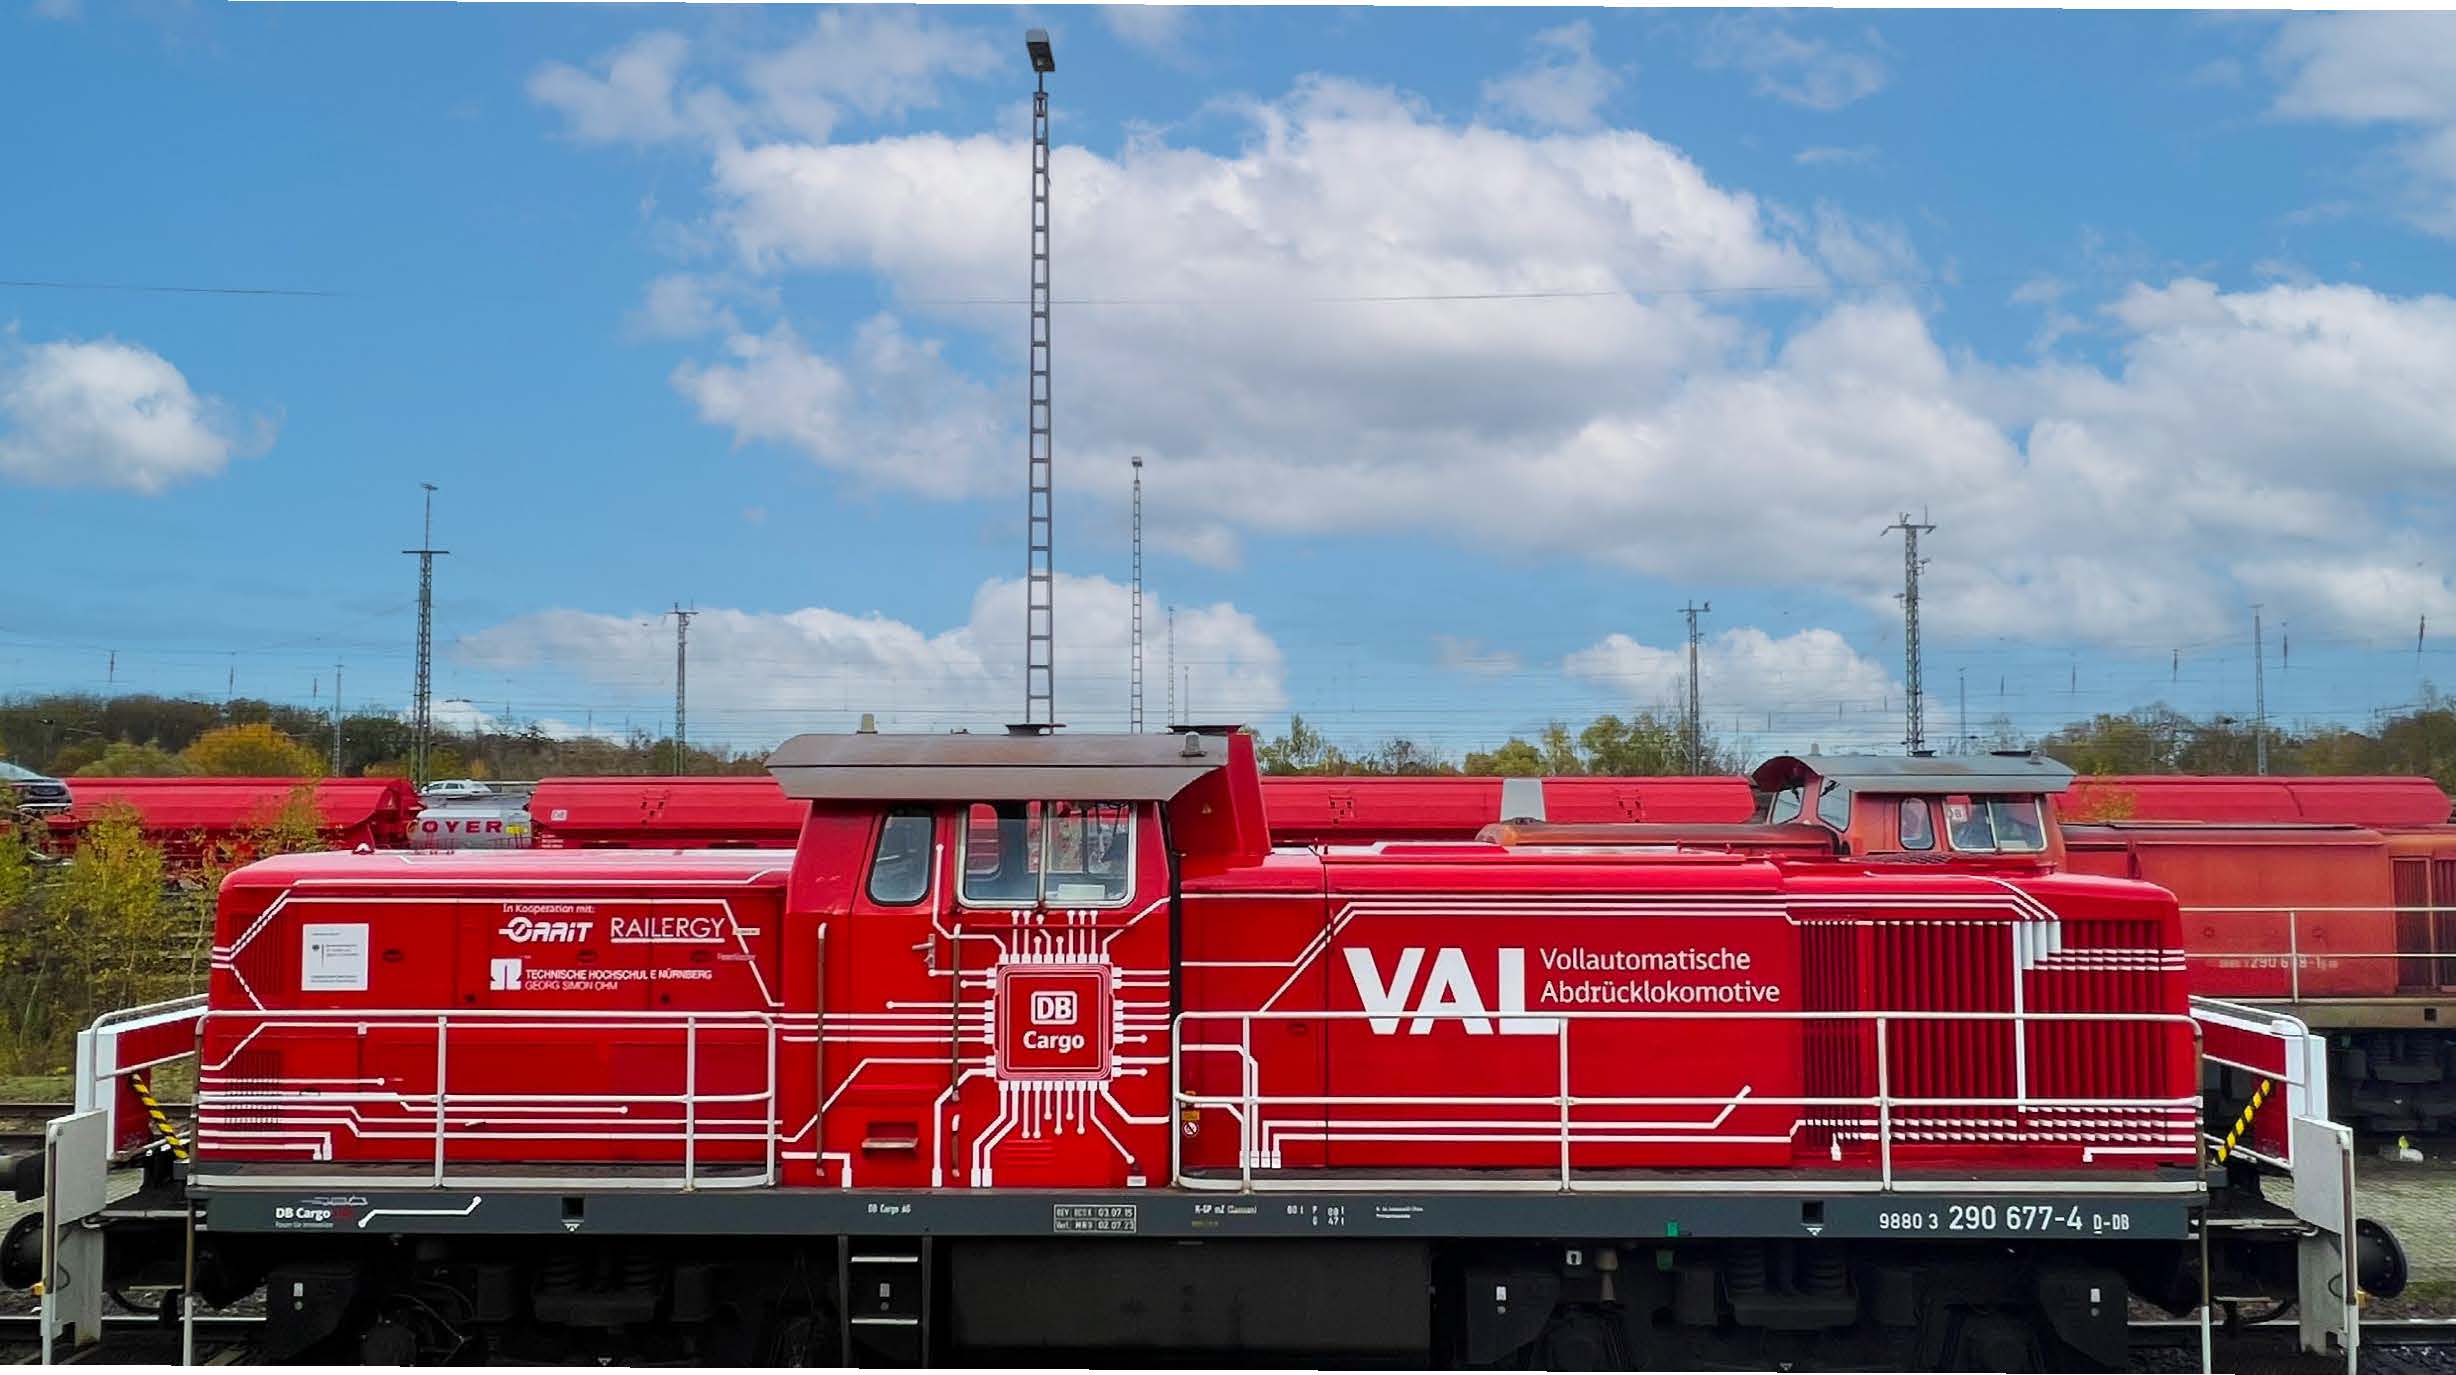 Side shot of a VAL train engine on the tracks, with other red trains in the background.